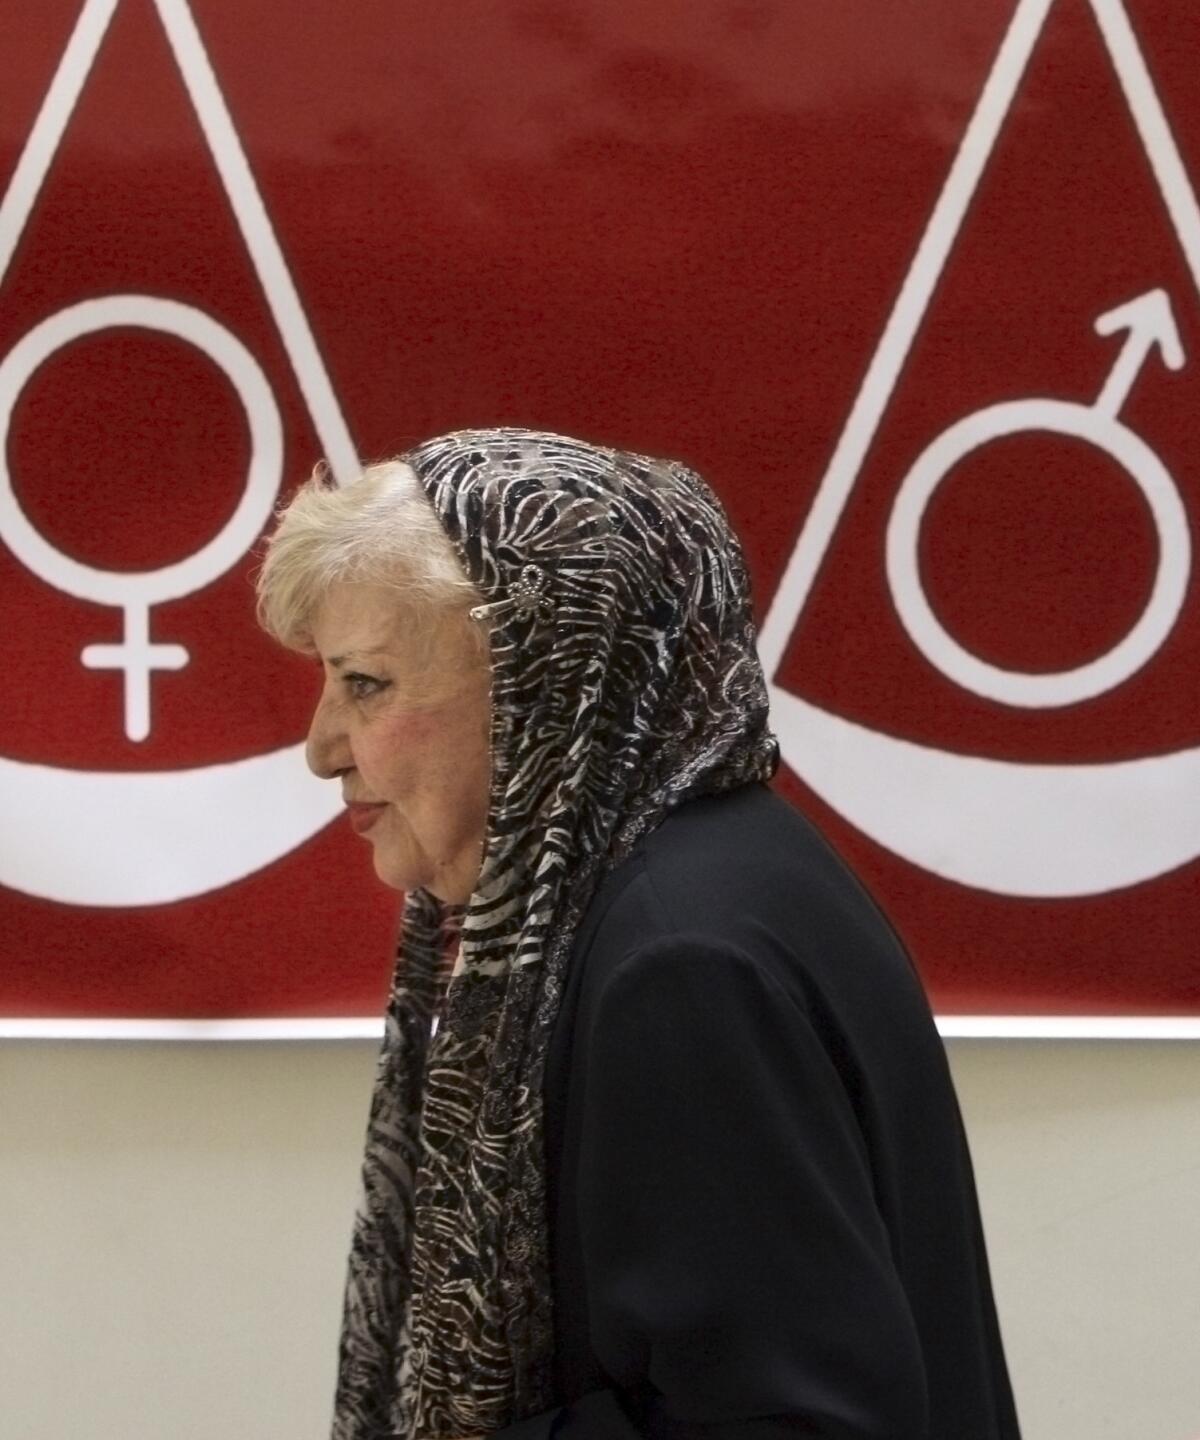 Iranian poet Simin Behbahani at a 2007 meeting on women's rights in Tehran. Behbahani has died at the age of 87.